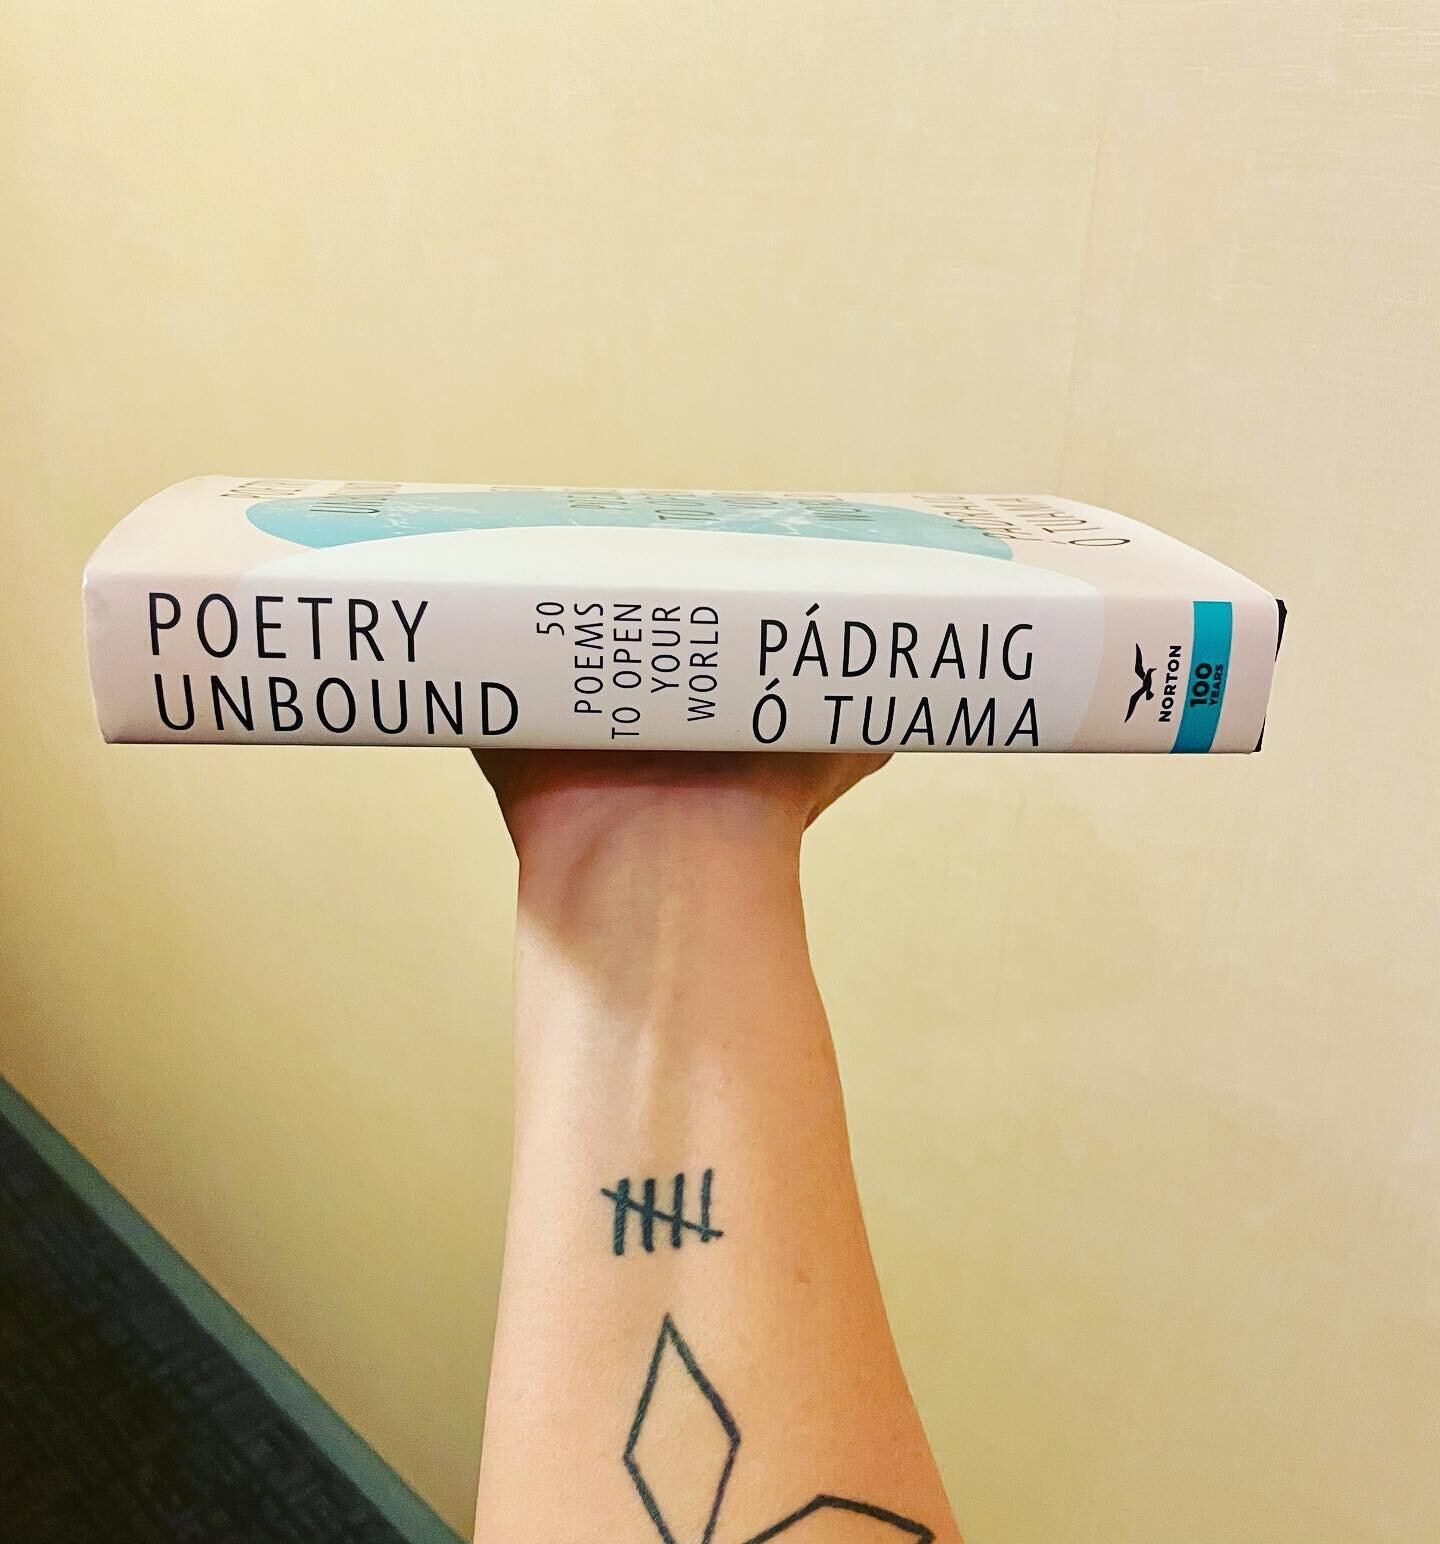 Happy Day: I was able to snag an early copy of Poetry Unbound by @padraigotuama from the @omegainstitute bookstore during the Poetry Unbound Workshop this week.

Cal has already pre-ordered several copies for the shop that will arrive by 12/6. Messag